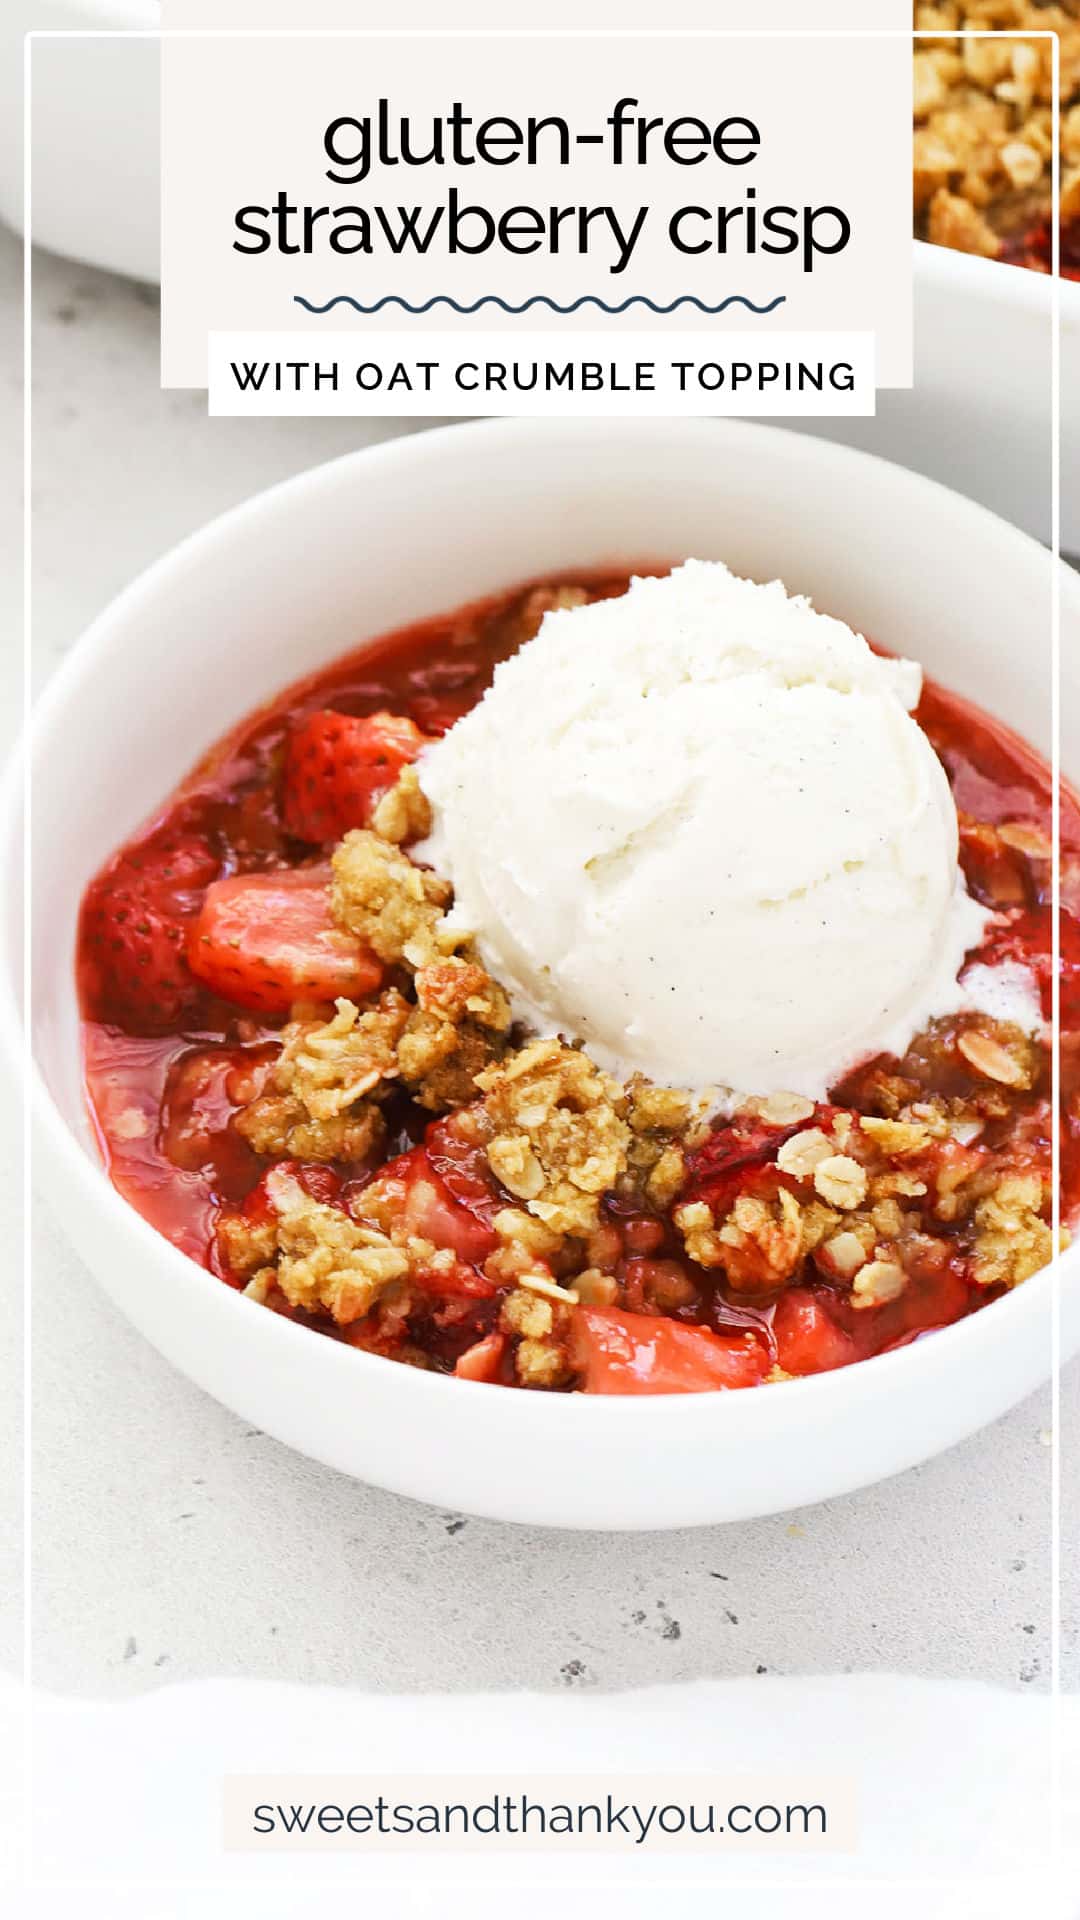 Strawberry season is the perfect time to make this easy gluten-free strawberry crisp recipe! Bursting with fresh berry flavor & finished with a simple oat crumble, it's summer's favorite dessert. / homemade gluten free strawberry crisp recipe / gluten free strawberry crumble recipe / gluten free strawberry crisp with oat topping / gluten free spring dessert / gluten free strawberry dessert / gluten free summer dessert / gluten free fruit crisp / gluten free fruit crumble